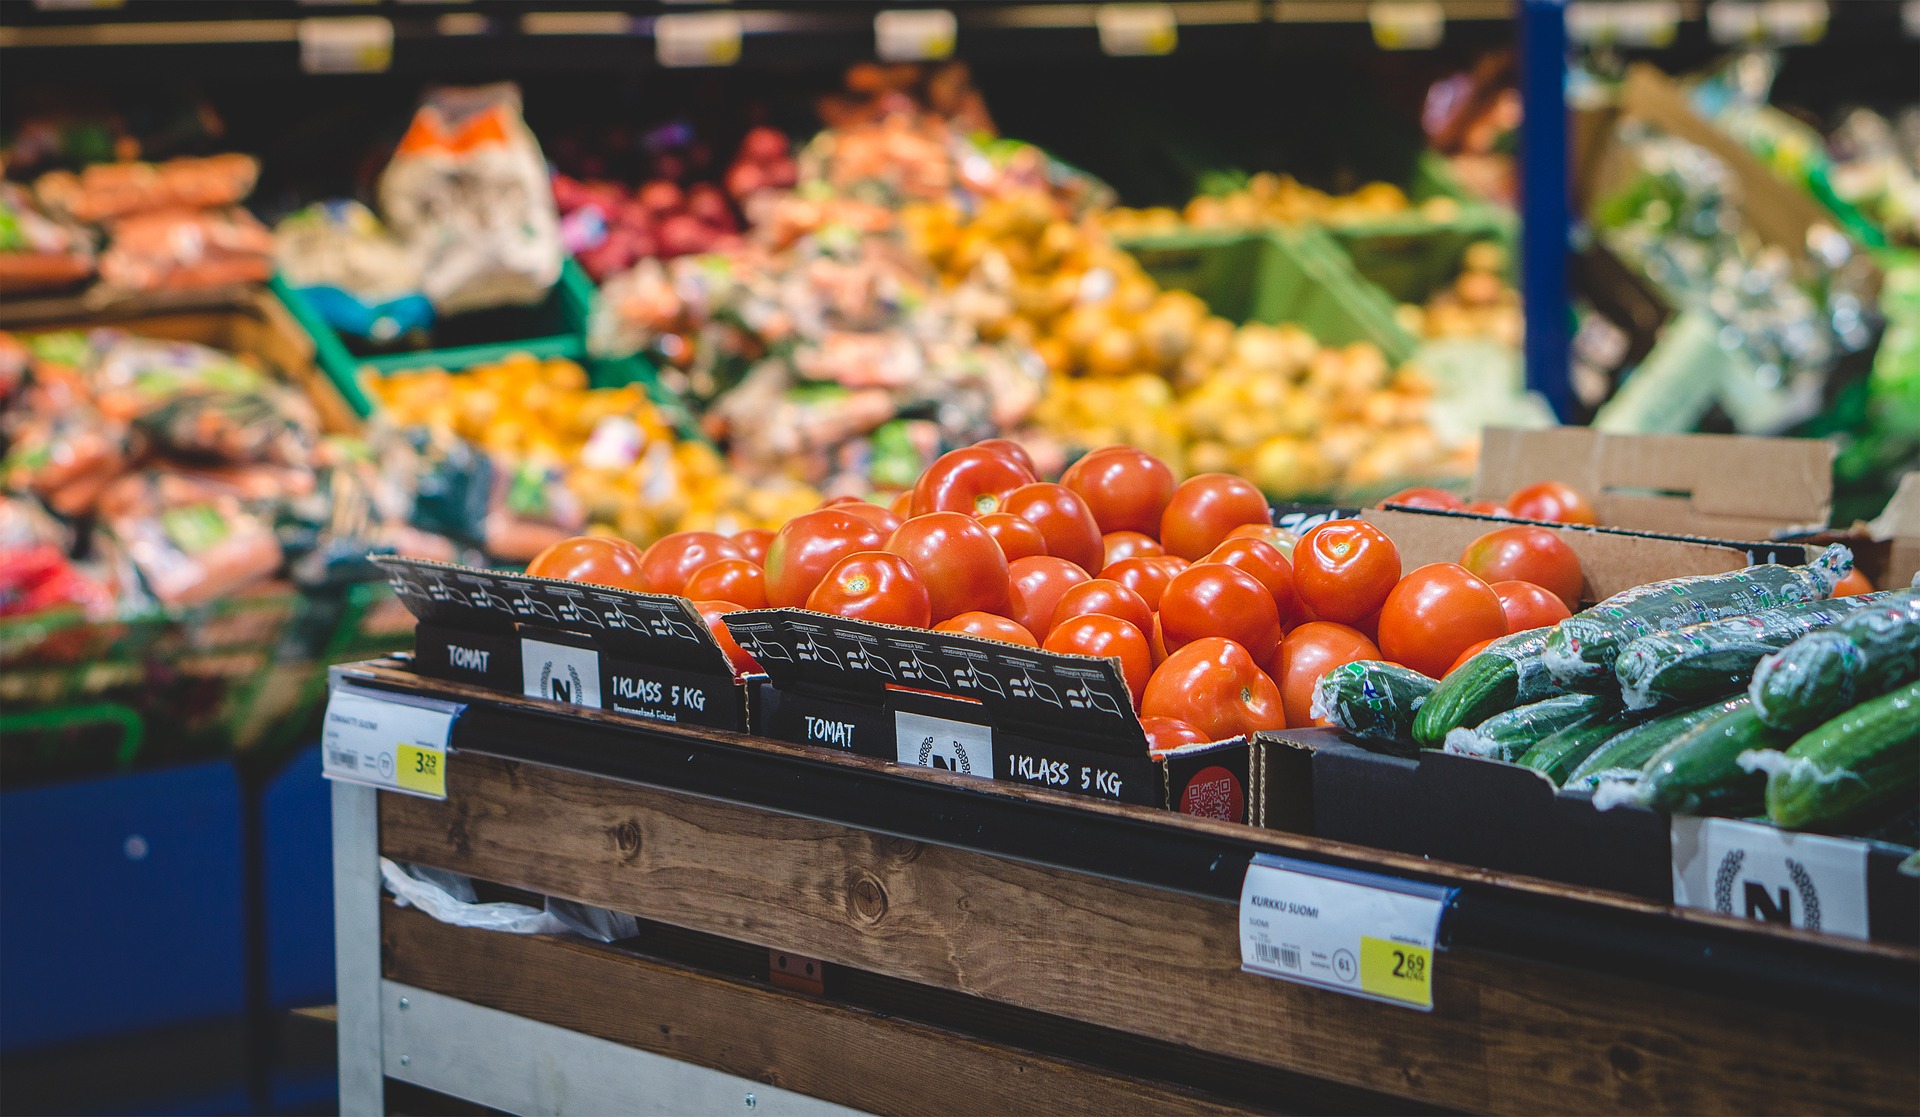 3 Ways Grocery Retailers Can Stand Out in 2018